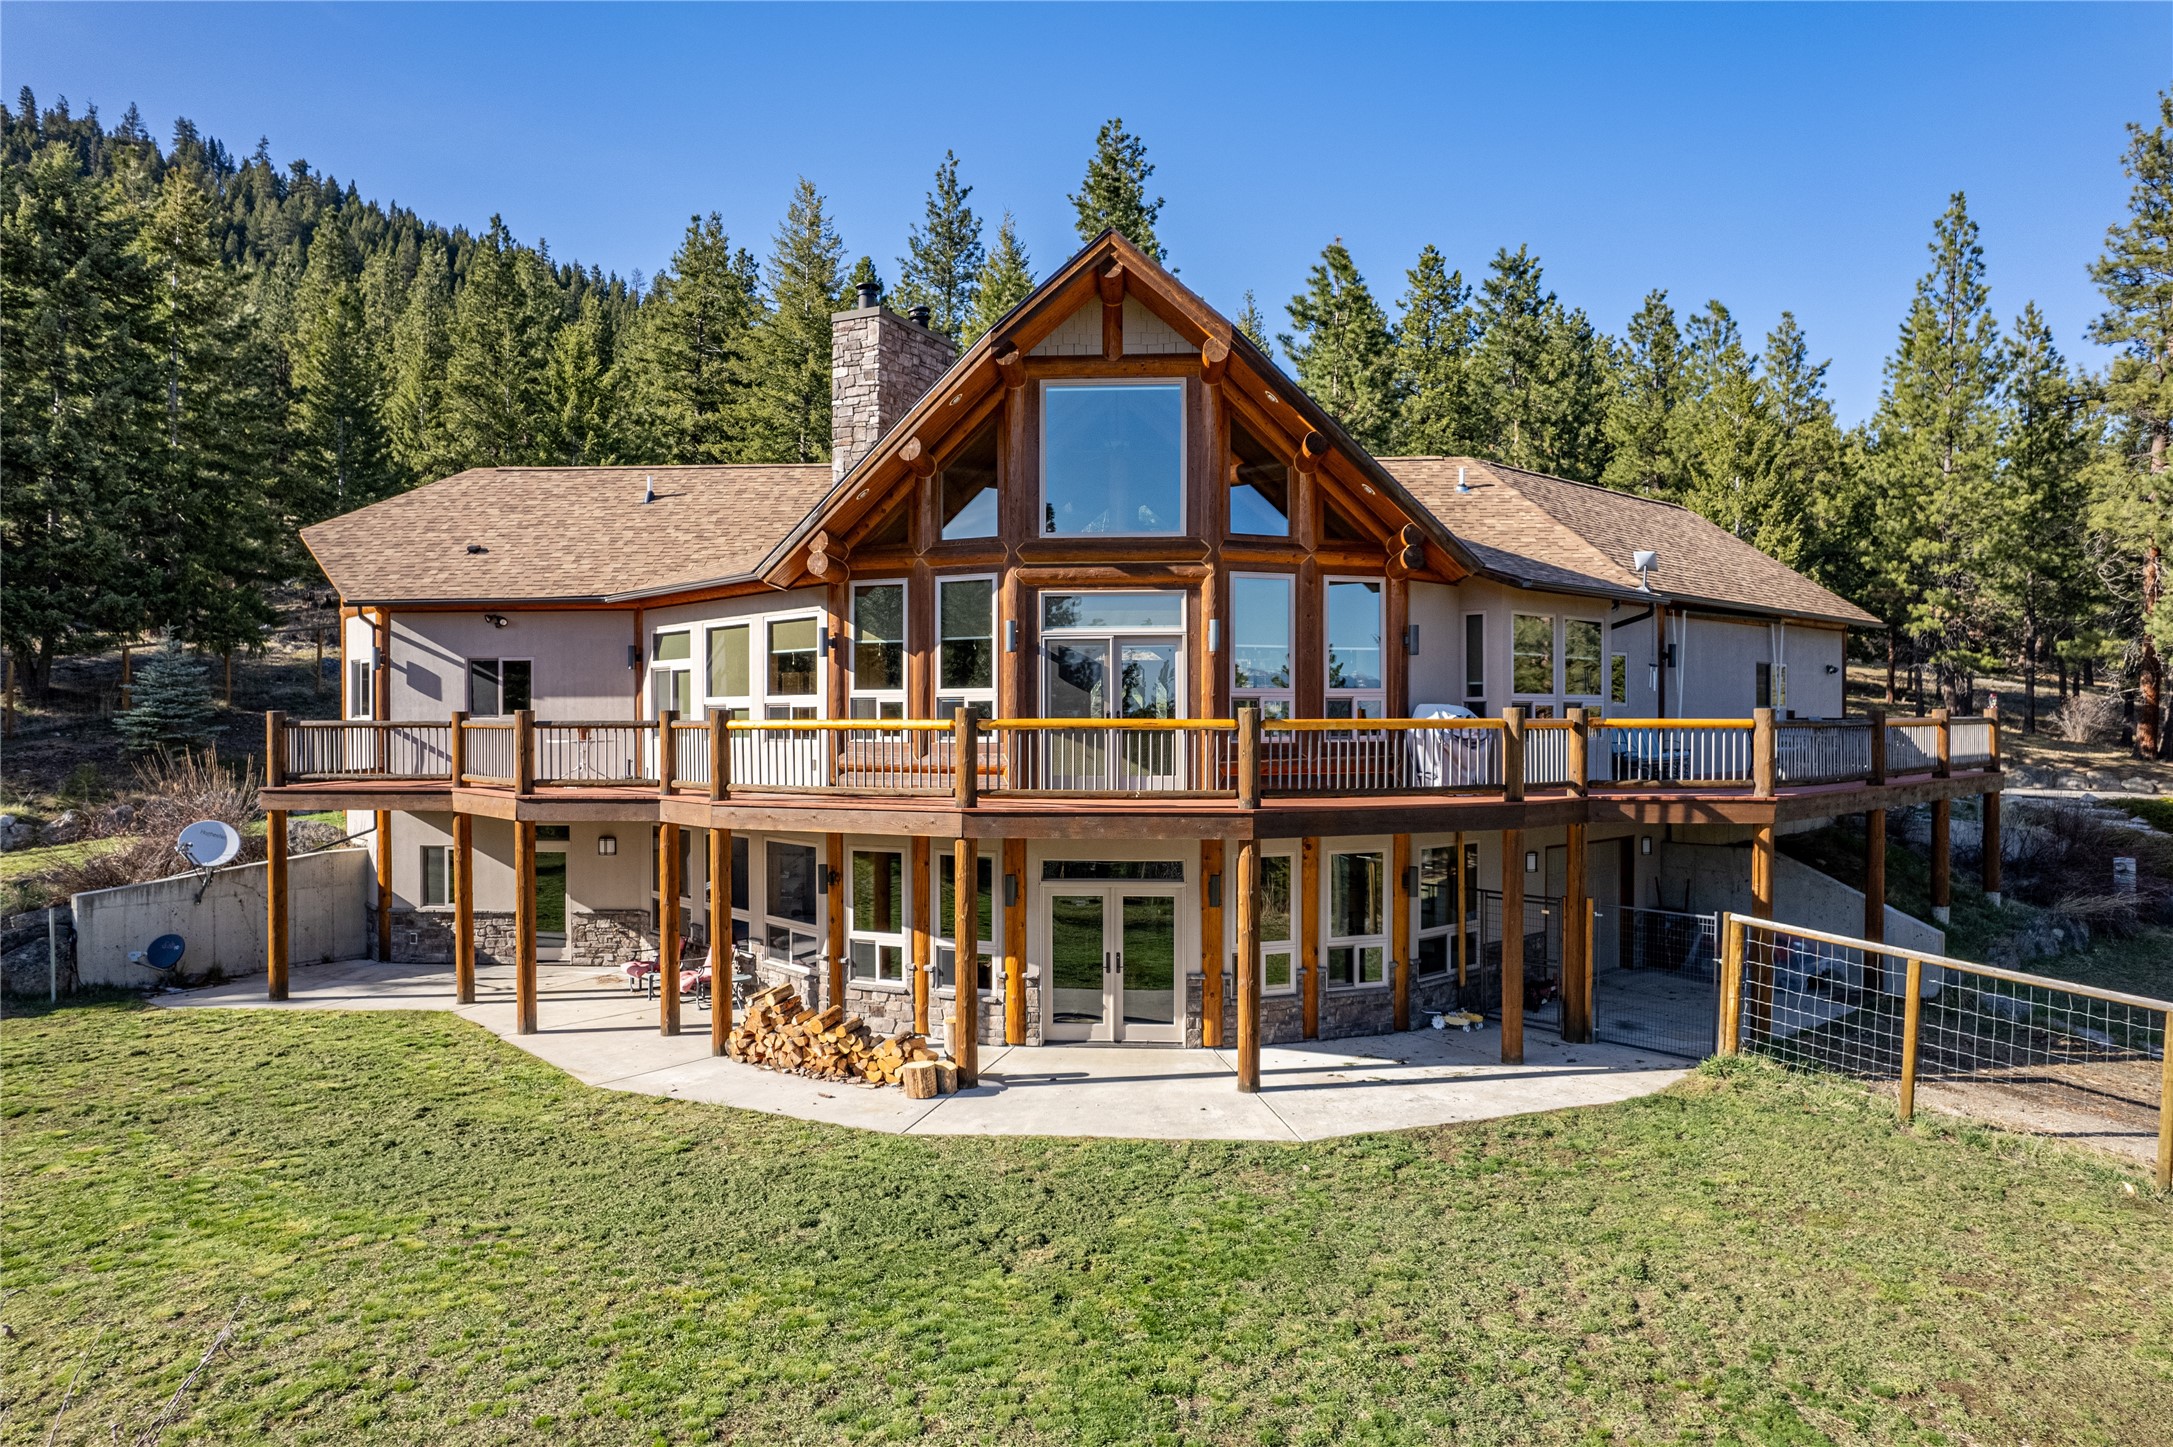 Nestled among the pines, on a sprawling 116± acres, this custom-built post and beam home in Victor offers a unique blend of rustic charm and refined elegance. Equipped with one of the best producing wells in the valley and situated against the stunning backdrop of the Bitterroot Mountains, this property epitomizes tranquility and seclusion. Surrounded by Forest Service land to the north and west, and conservation easement land to the south, this home ensures uninterrupted panoramic views of its breathtaking natural surroundings. Boasting 3,270 Sq. Ft. of living space, the residence features meticulous craftsmanship with intricate wood detailing, king log trusses, and a harmonious fusion of ceramic and wood flooring that maximizes in-floor radiant heating. Step through the geometrically designed entrance into the main level, where vaulted cathedral ceilings and expansive windows invite abundant natural light and passive solar heating while showcasing vistas of the Bitterroot Valley. The main floor's centerpiece is a magnificent sandstone Tulikivi fireplace, creating a cozy ambiance in the living and main floor bedroom. The chef's kitchen is a culinary delight, outfitted with cherry wood cabinets, forest green Silestone countertops, an island with an eating bar, and a generous sized pantry. The primary suite, conveniently located on the main level, offers a lavish retreat with a spa-like bathroom featuring a custom-tiled shower, dual vanities, and spacious walk-in closets. The walkout lower level extends the living space with a sizable living room, an additional bedroom, and a third non-conforming bedroom, or den, complemented by a convenient kitchenette for guests' comfort. complemented by a convenient kitchenette for guests' comfort. Outside the main floor is a sprawling deck with an awning that provides an idyllic setting for outdoor entertaining while soaking in the breathtaking views. The property also features 2 small ponds and apple, pear and cherry trees. Recent updates include a freshly painted exterior stucco, newly sealed posts and beams, and a new roof, ensuring the home's impeccable condition. Complete with a comprehensive fire suppression system with a 400 gallon cistern, this property seamlessly integrates rustic elegance with modern amenities and security, offering an unparalleled retreat in the heart of the Montana wilderness.